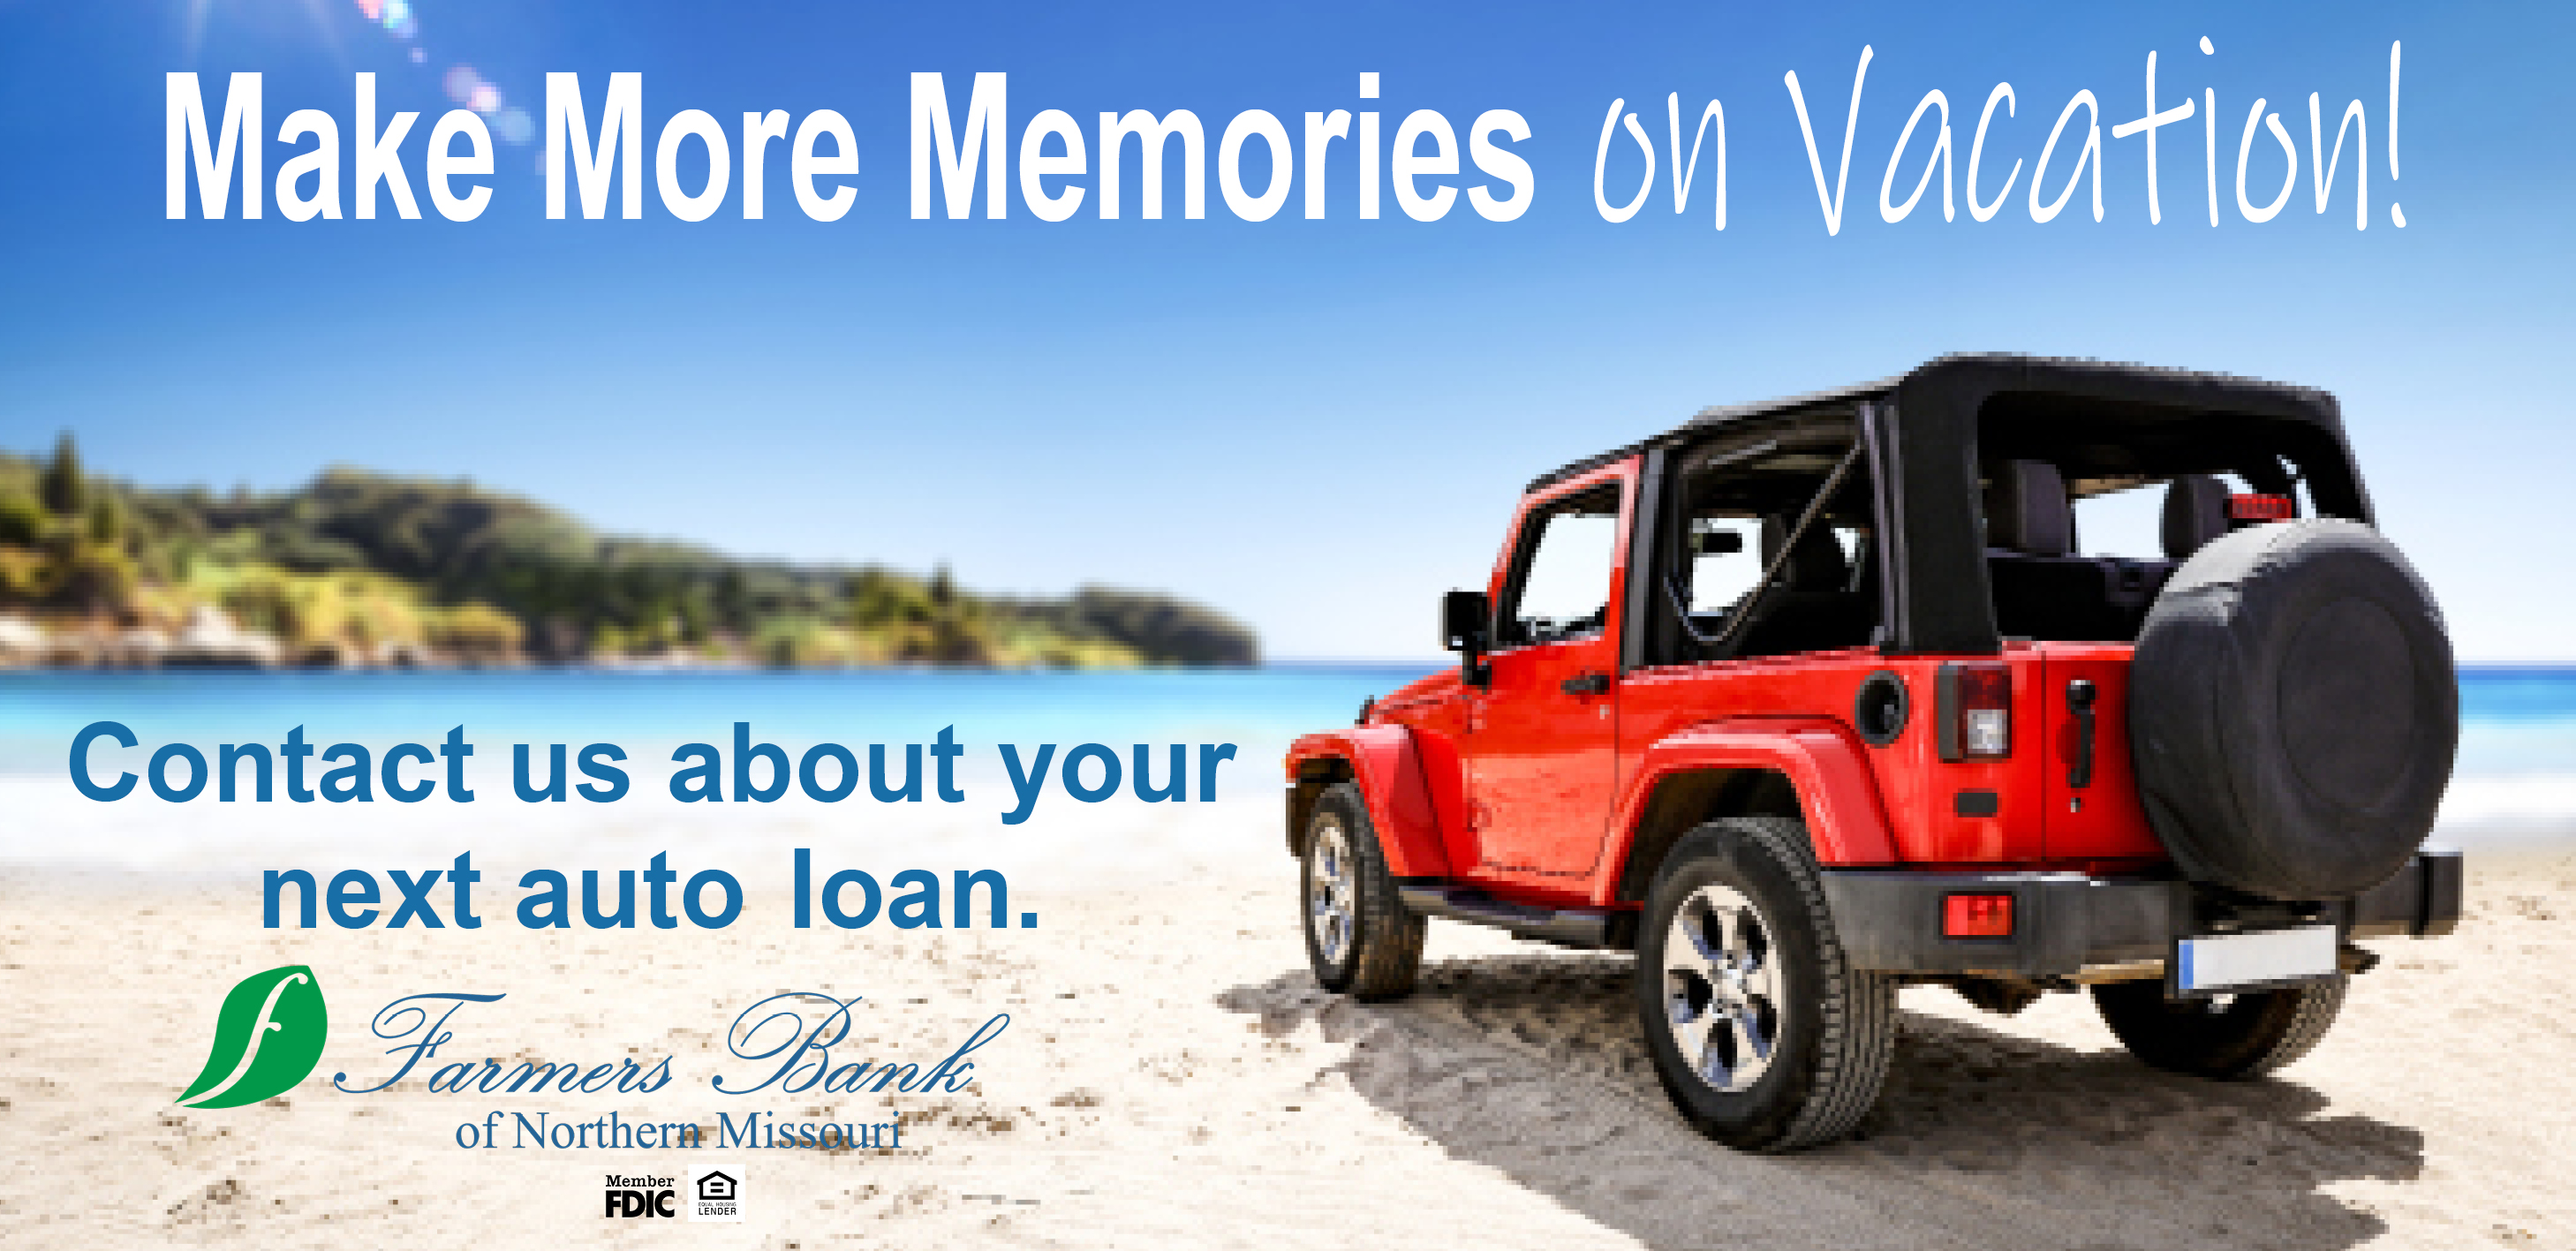 Make More Memories on Vacation. Contact us about your next auto loan. Farmers Bank of Northern Missouri, Member FDIC, Equal Housing Lender.